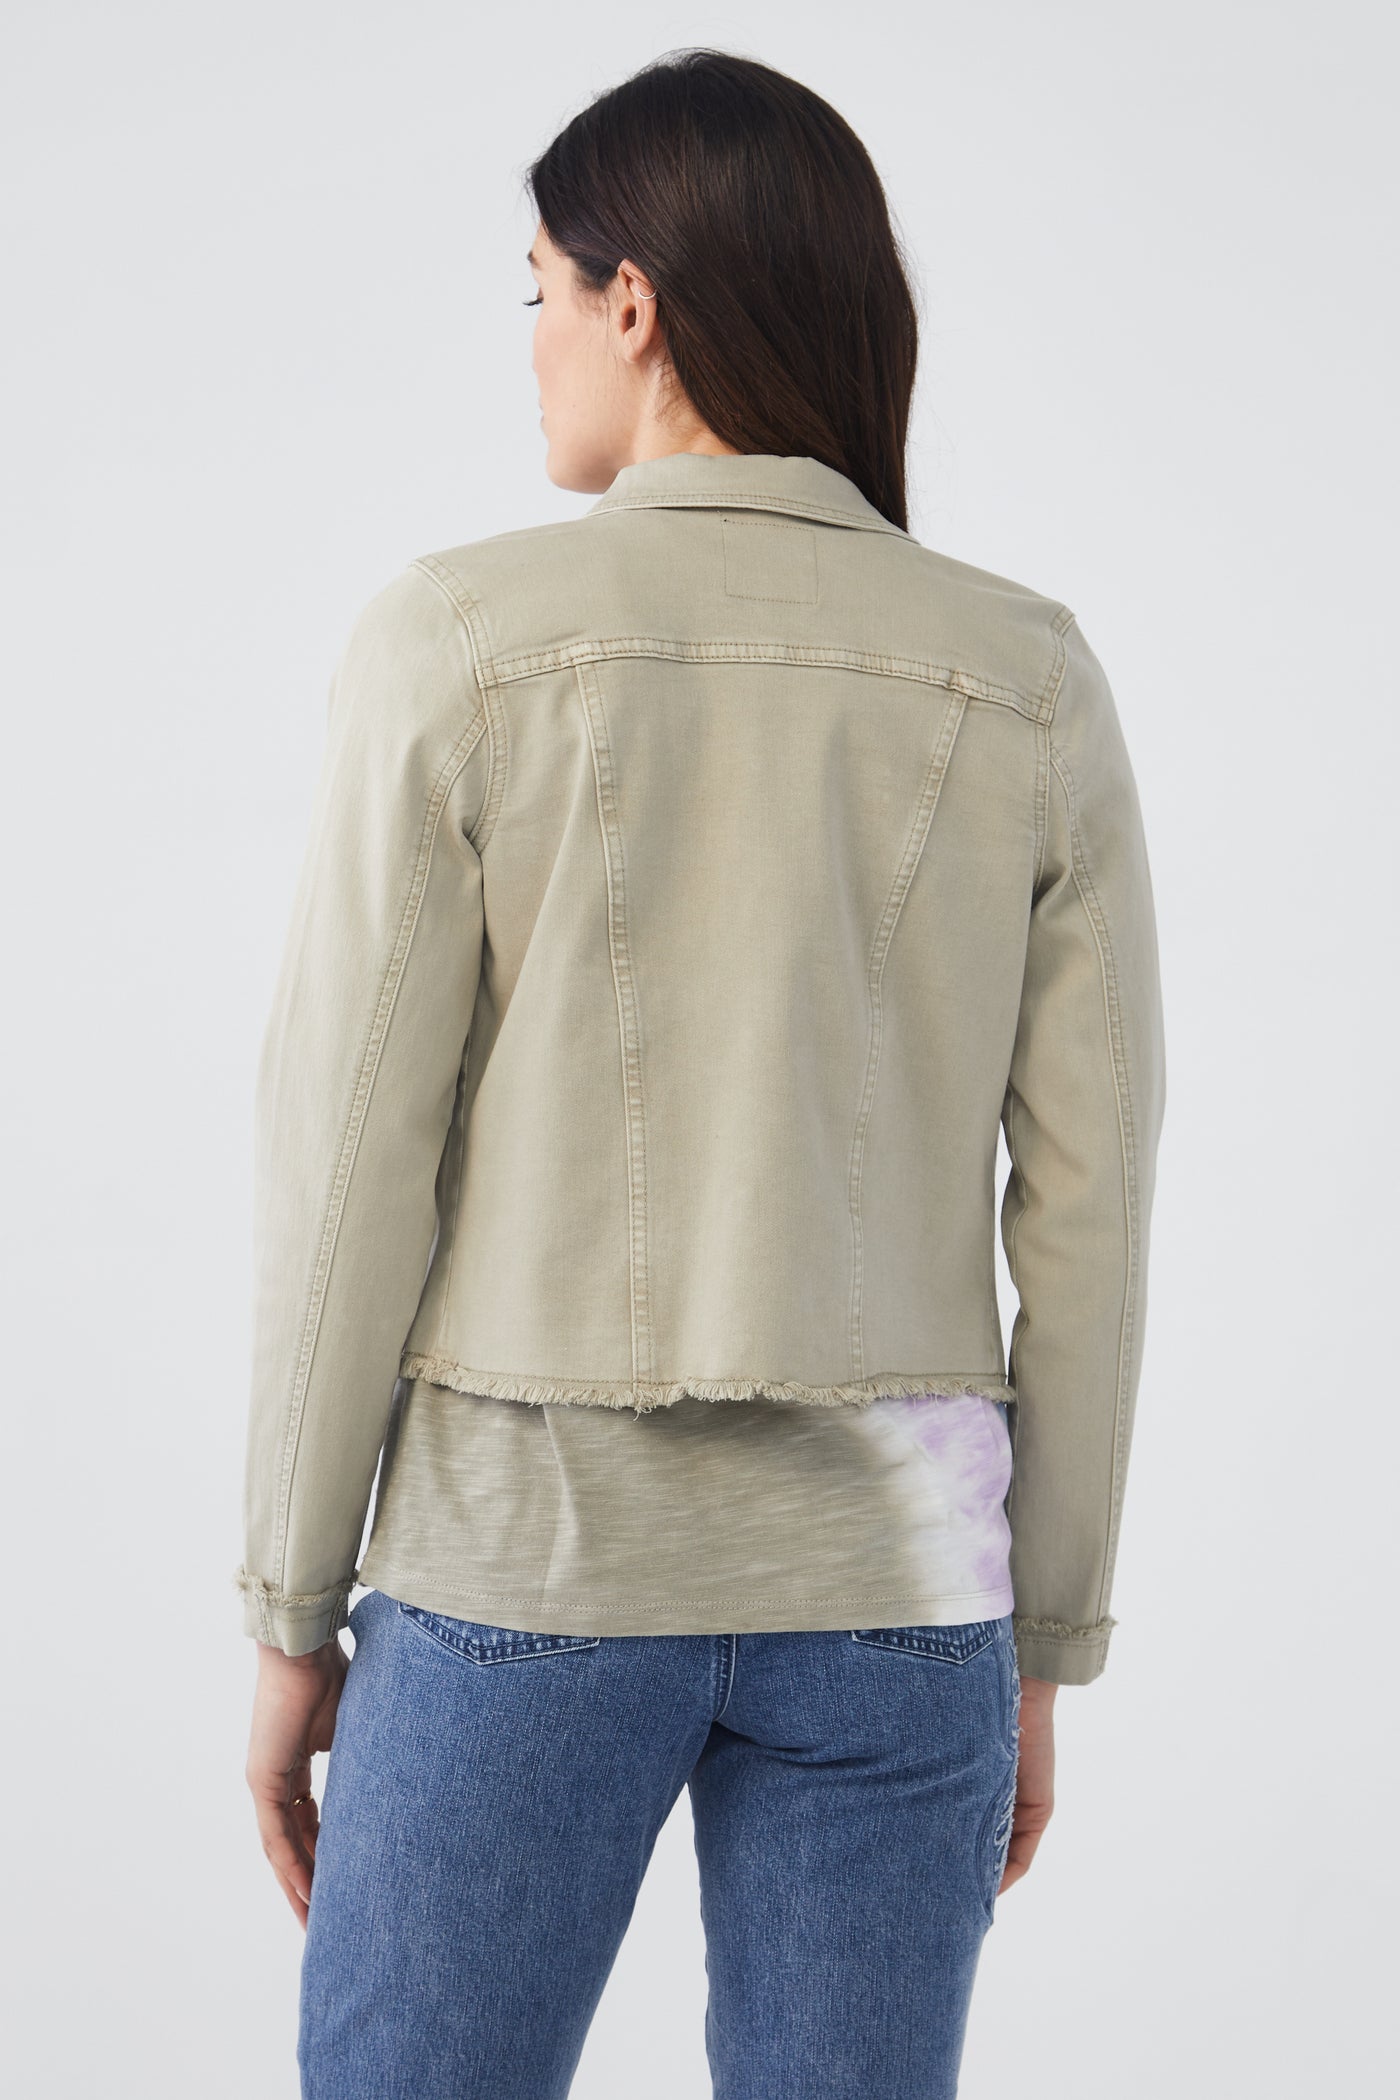 French Dressing Jeans Shirt Jacket in Euro Twill 